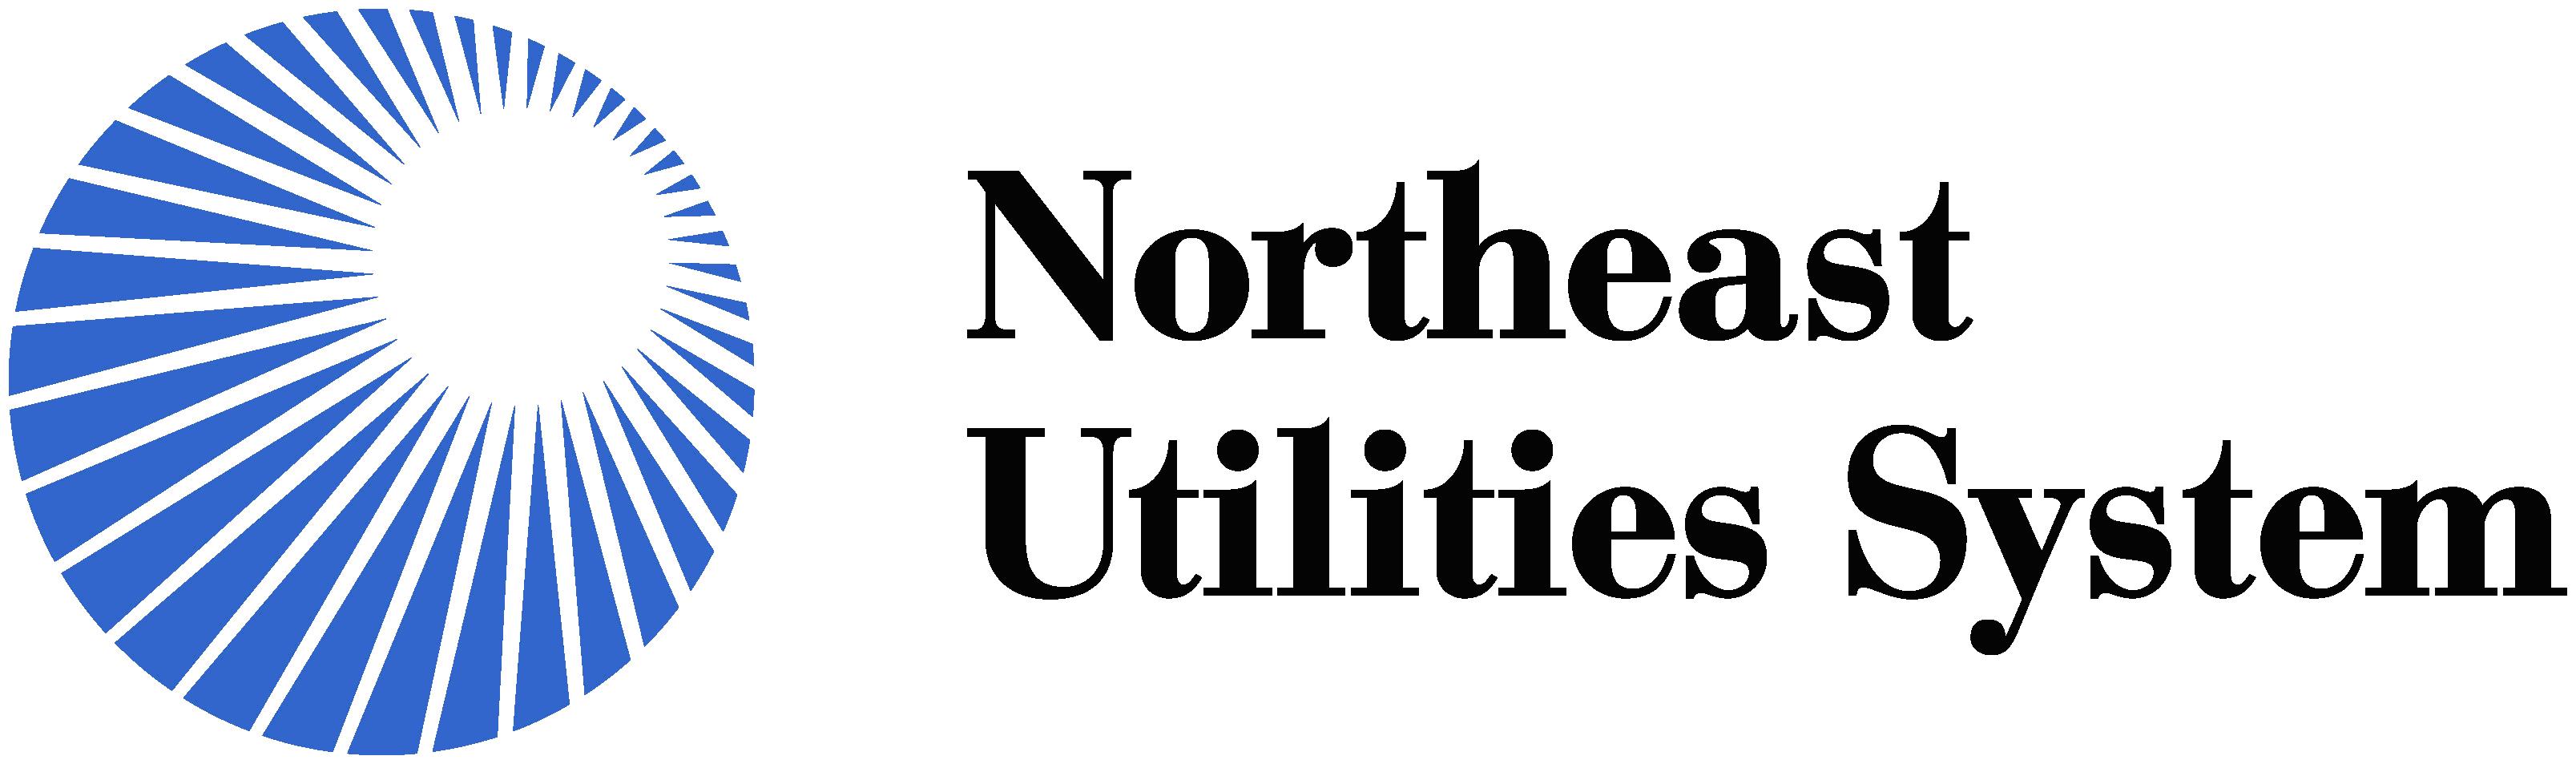 Northeast Utilities Releases First Corporate Social Responsibility Report Image.